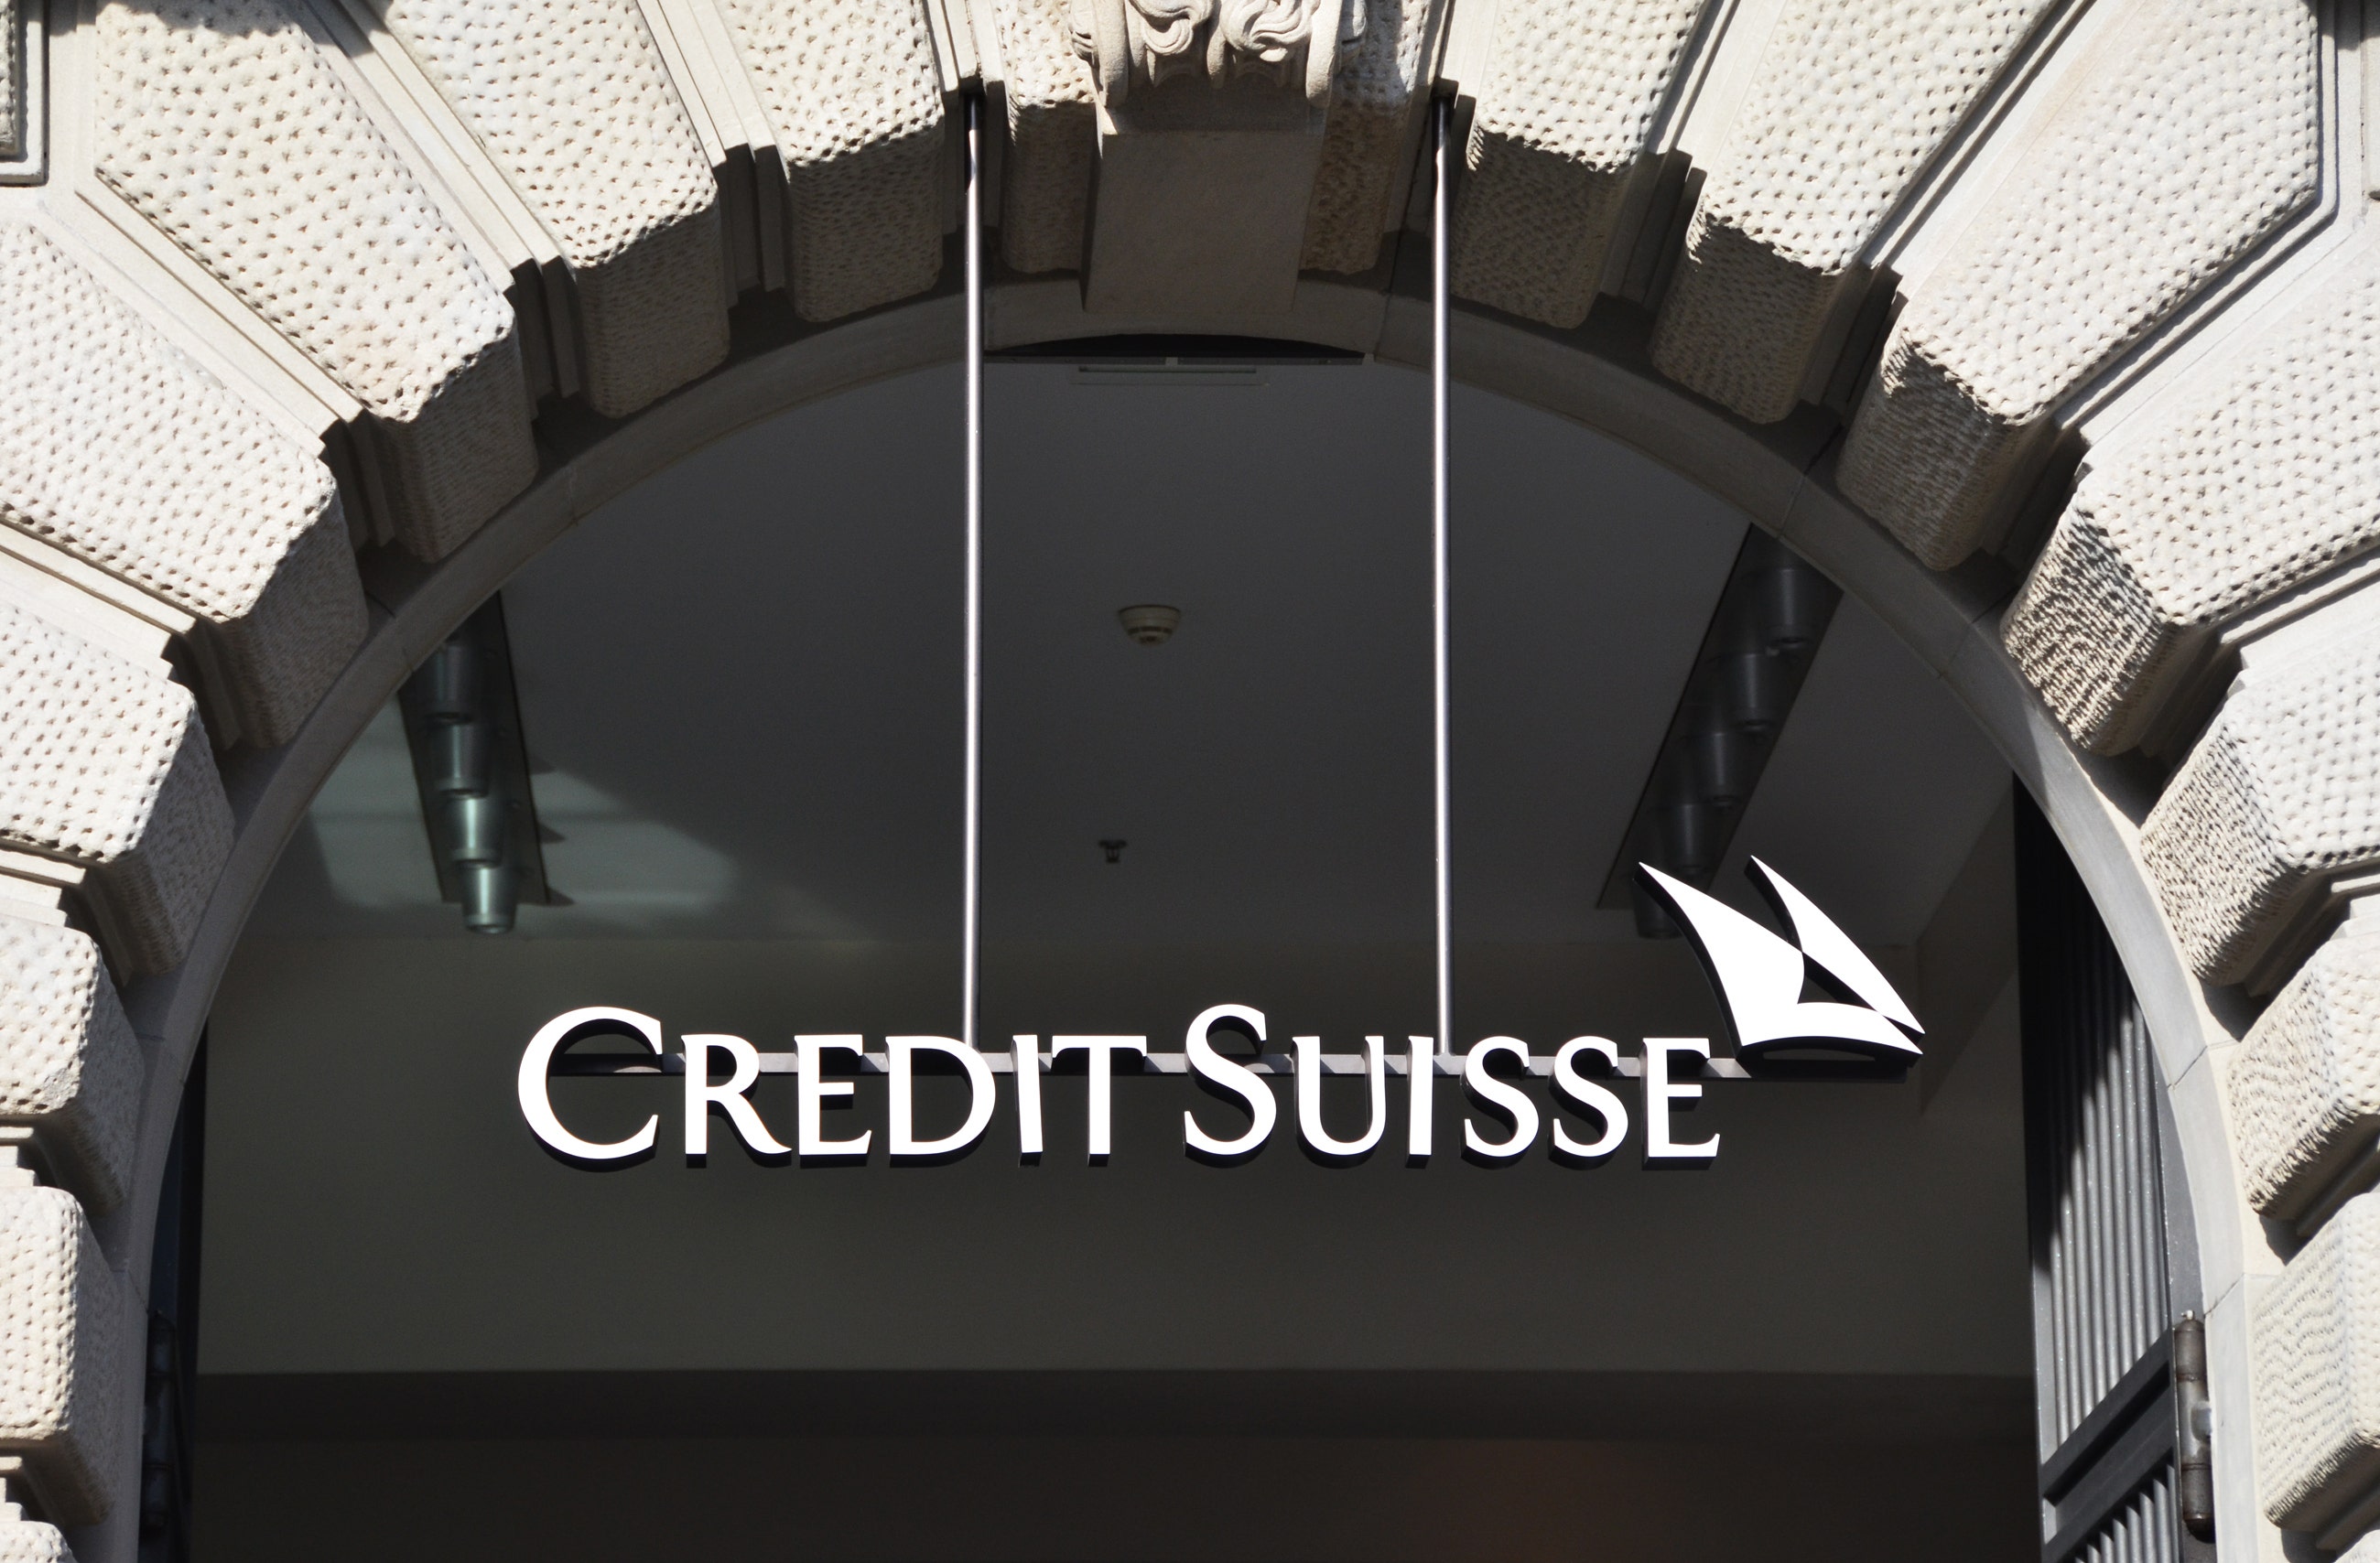 As Credit Suisse Woes Inspire Parallels To 2008 Financial Crisis, Analyst Says 'Much Different Environment, Much Different Situation'